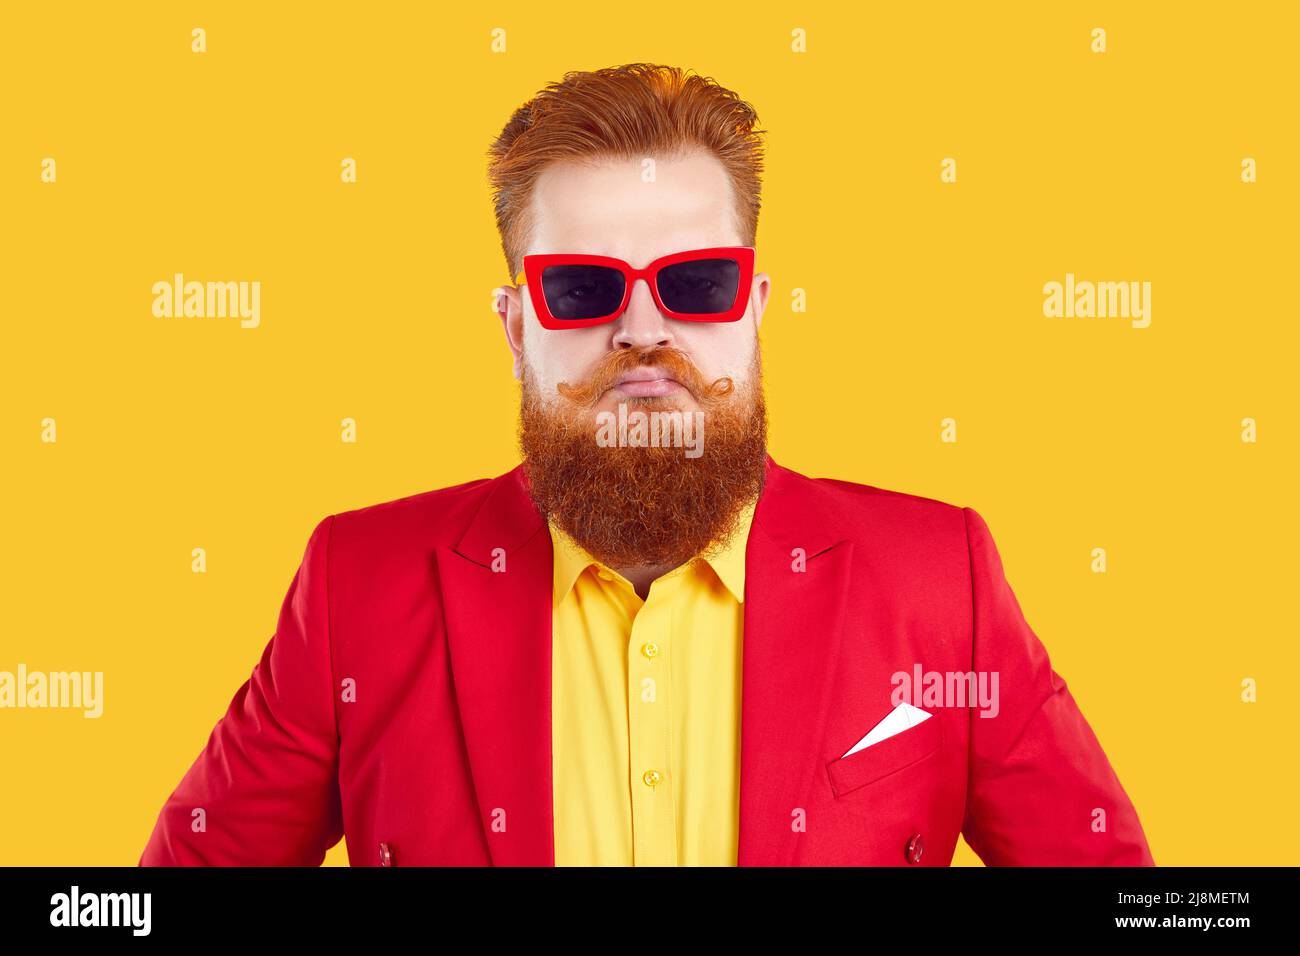 Funny stylish extravagant bearded chubby man pretending to be serious on vivid yellow background. Stock Photo